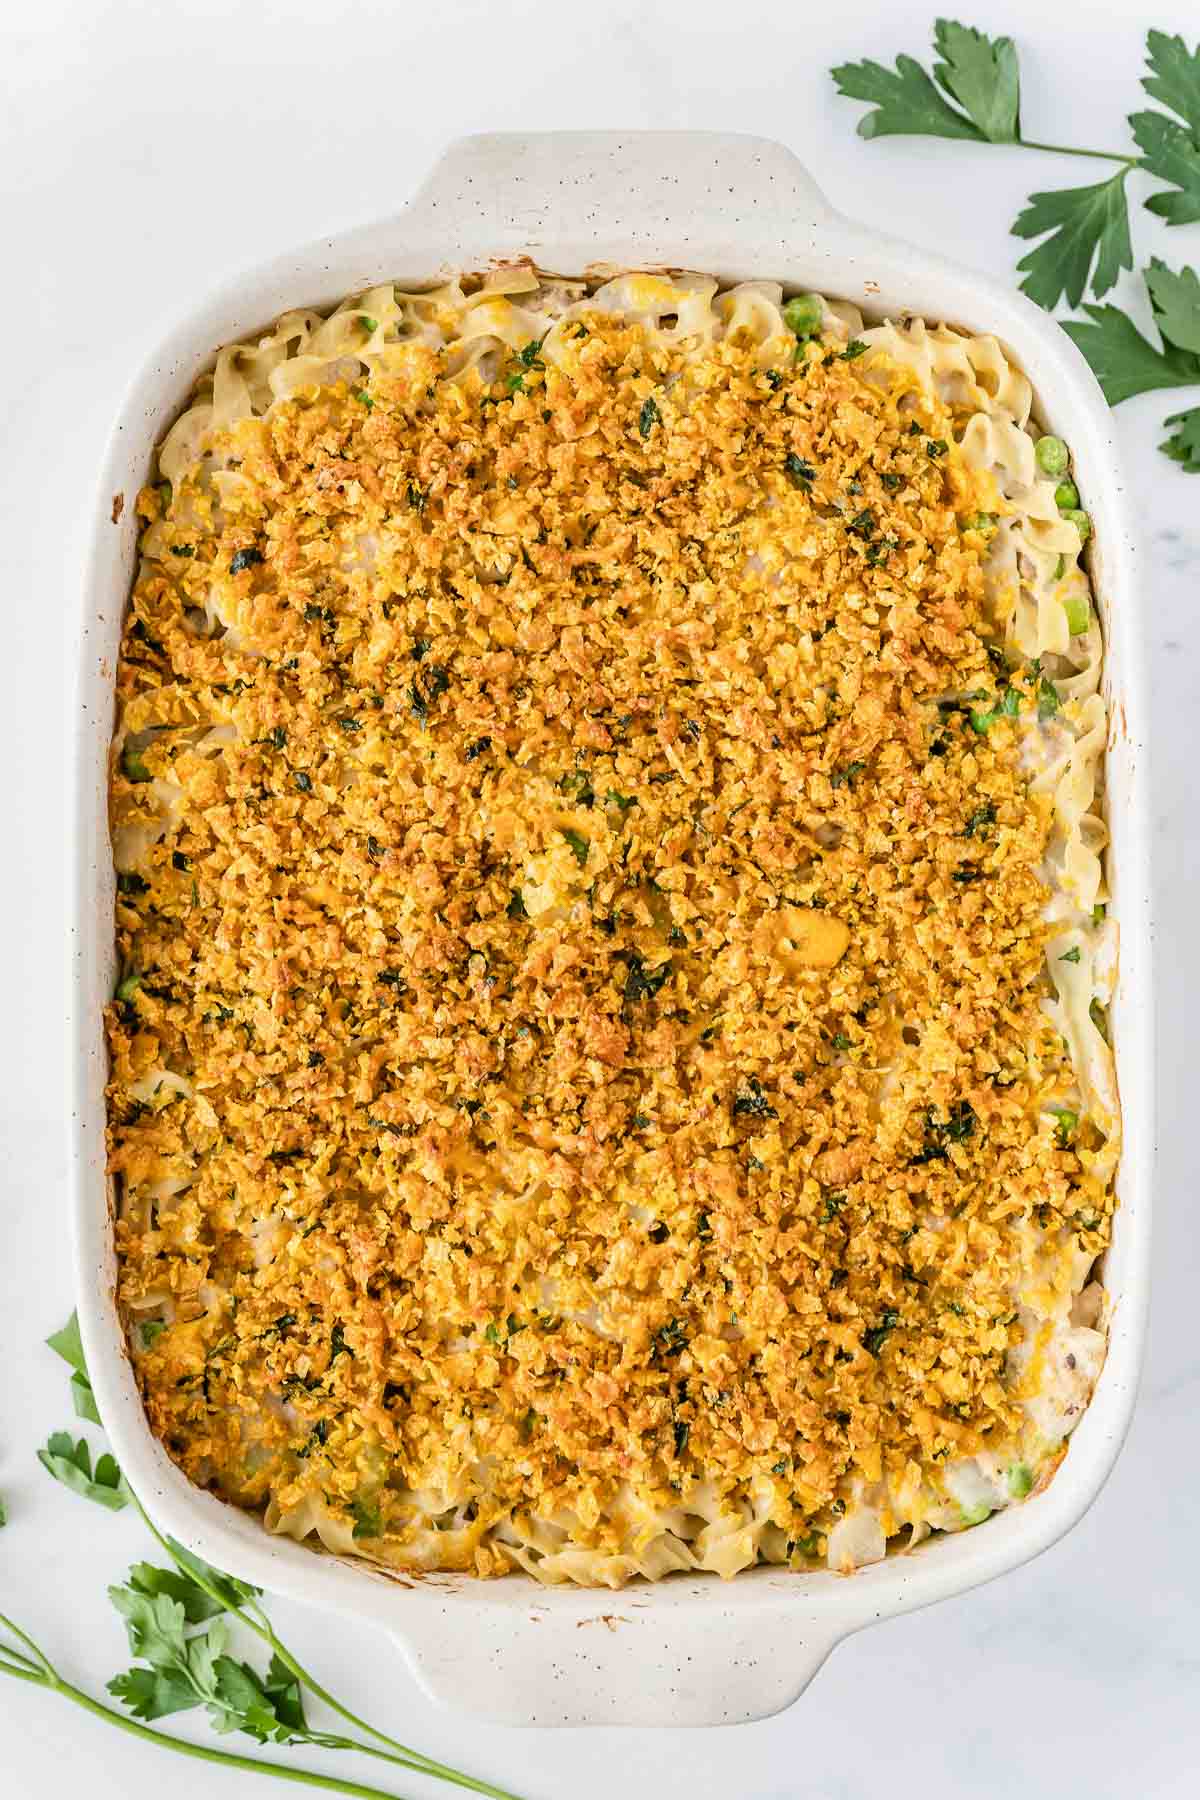 rectangle casserole dish with creamy tuna noodle mixture topped with a crunchy topping.